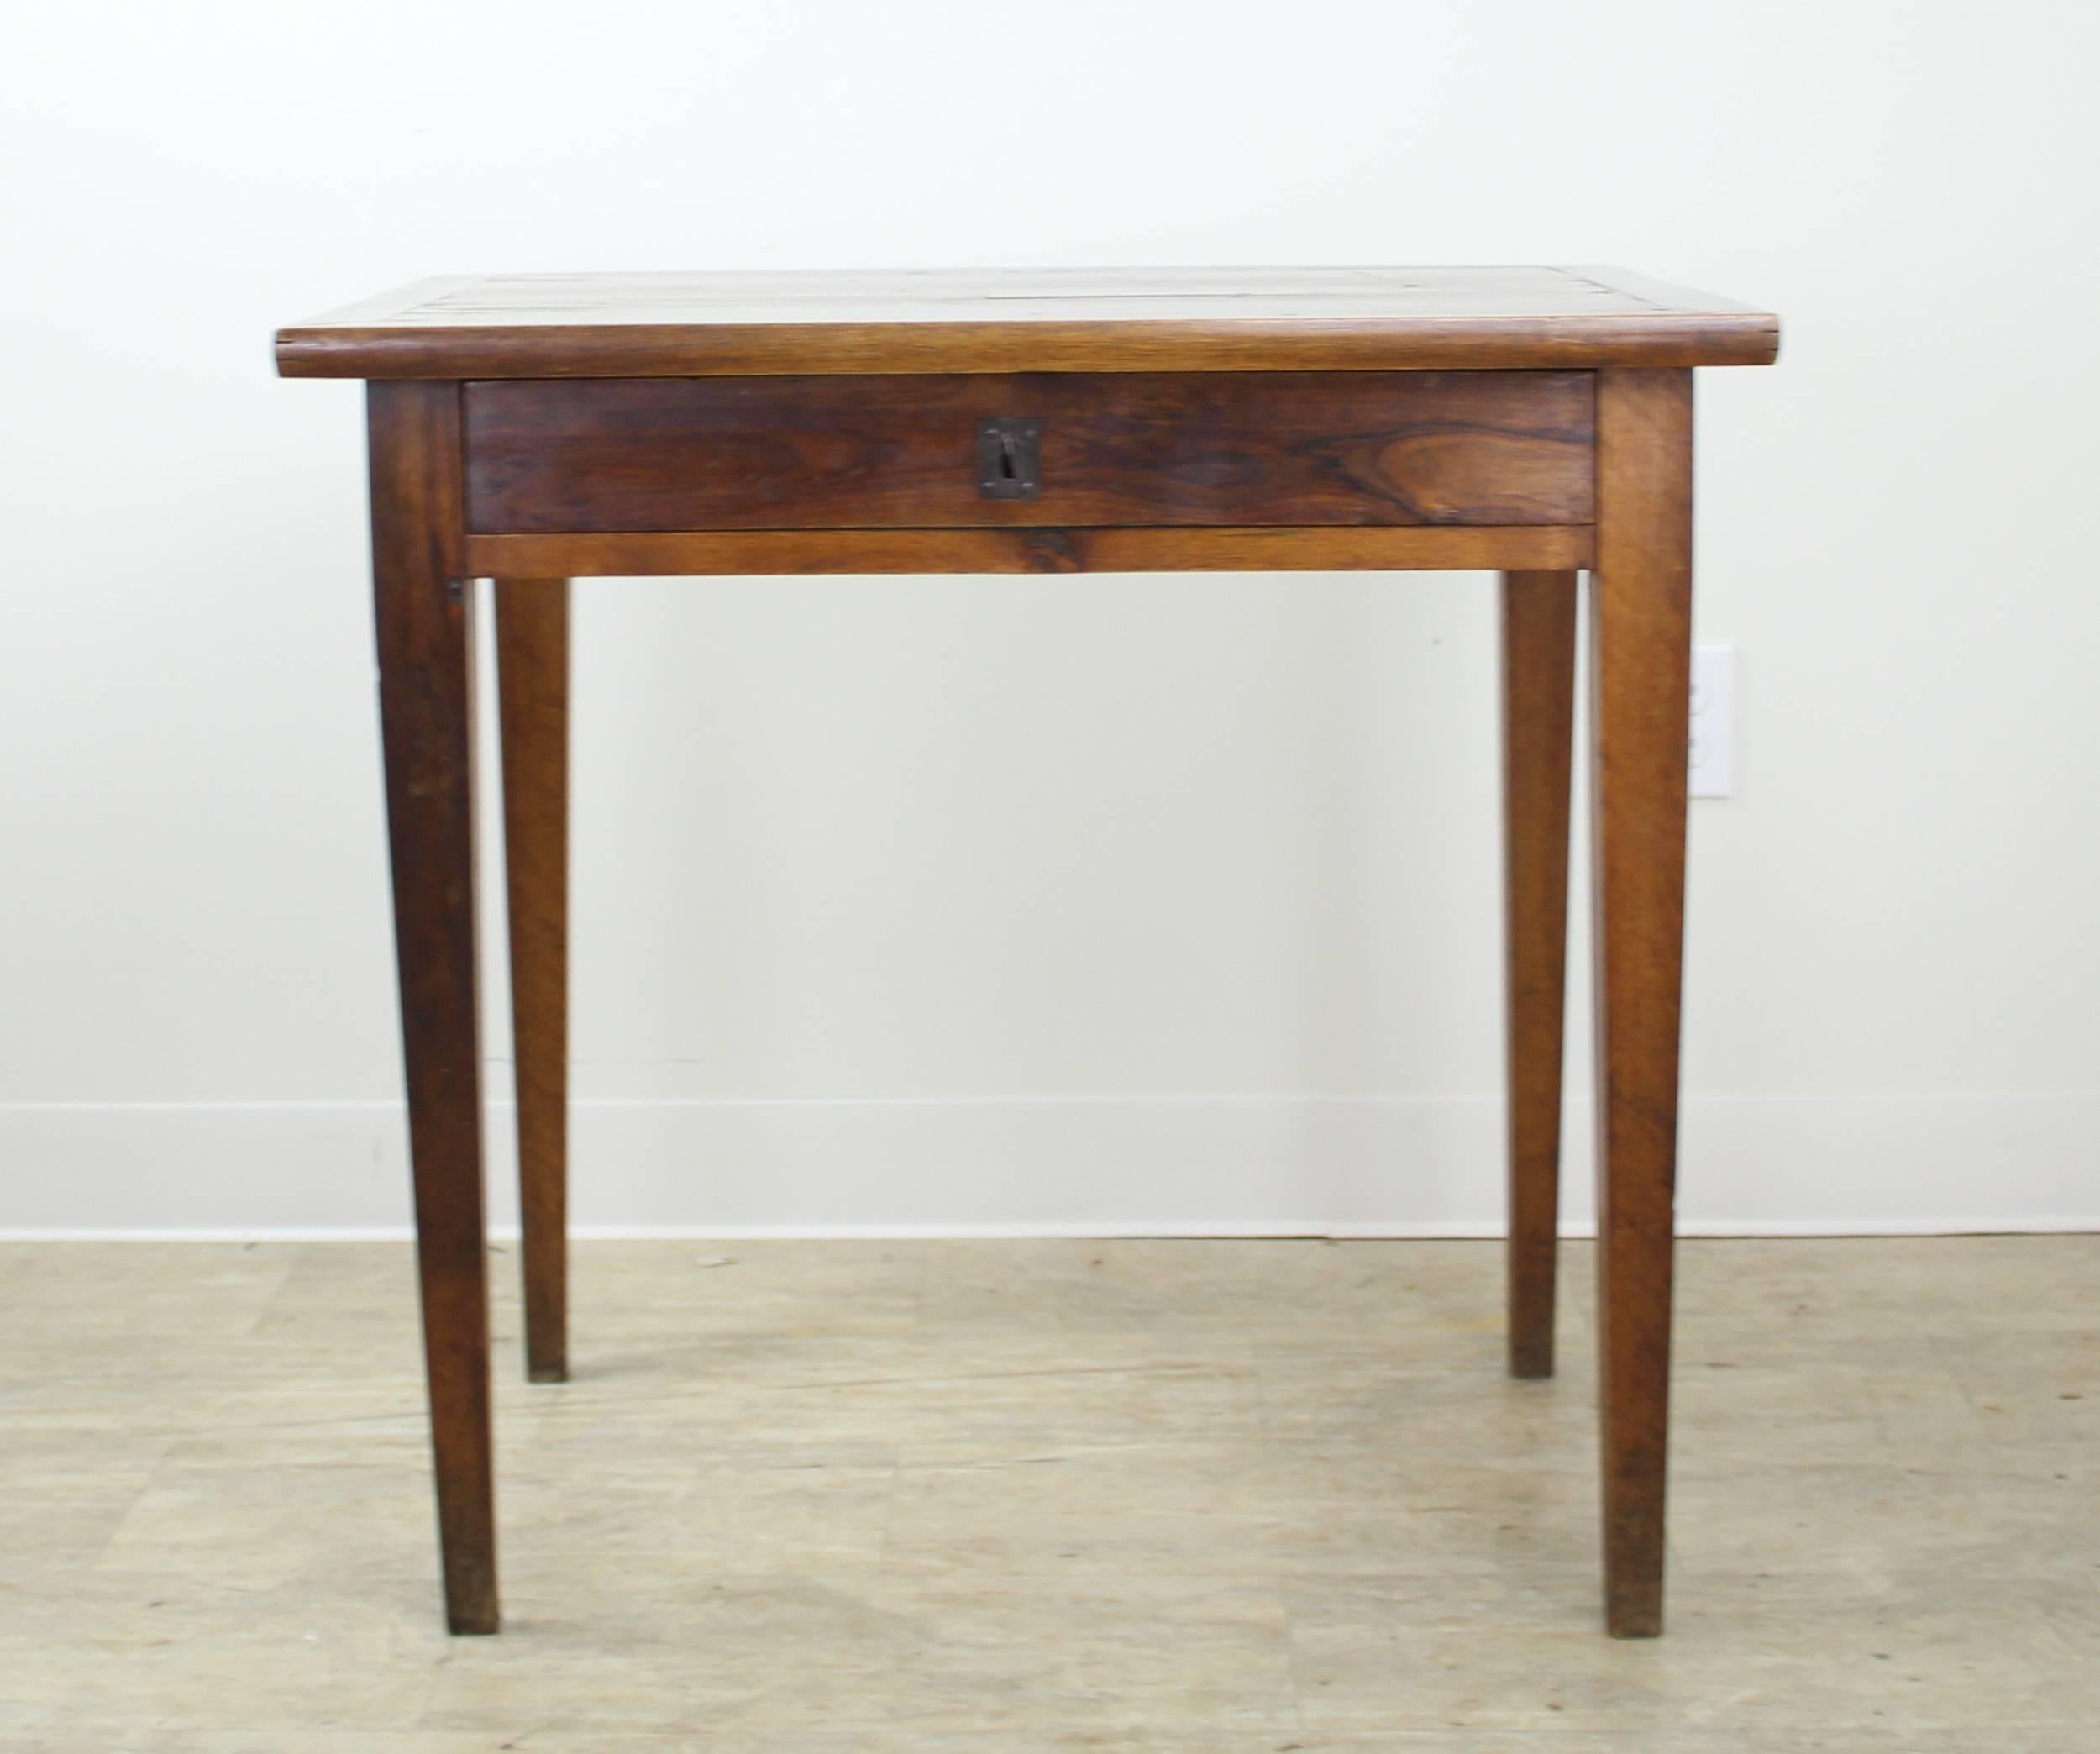 French Antique Walnut Side Table with Framed Top